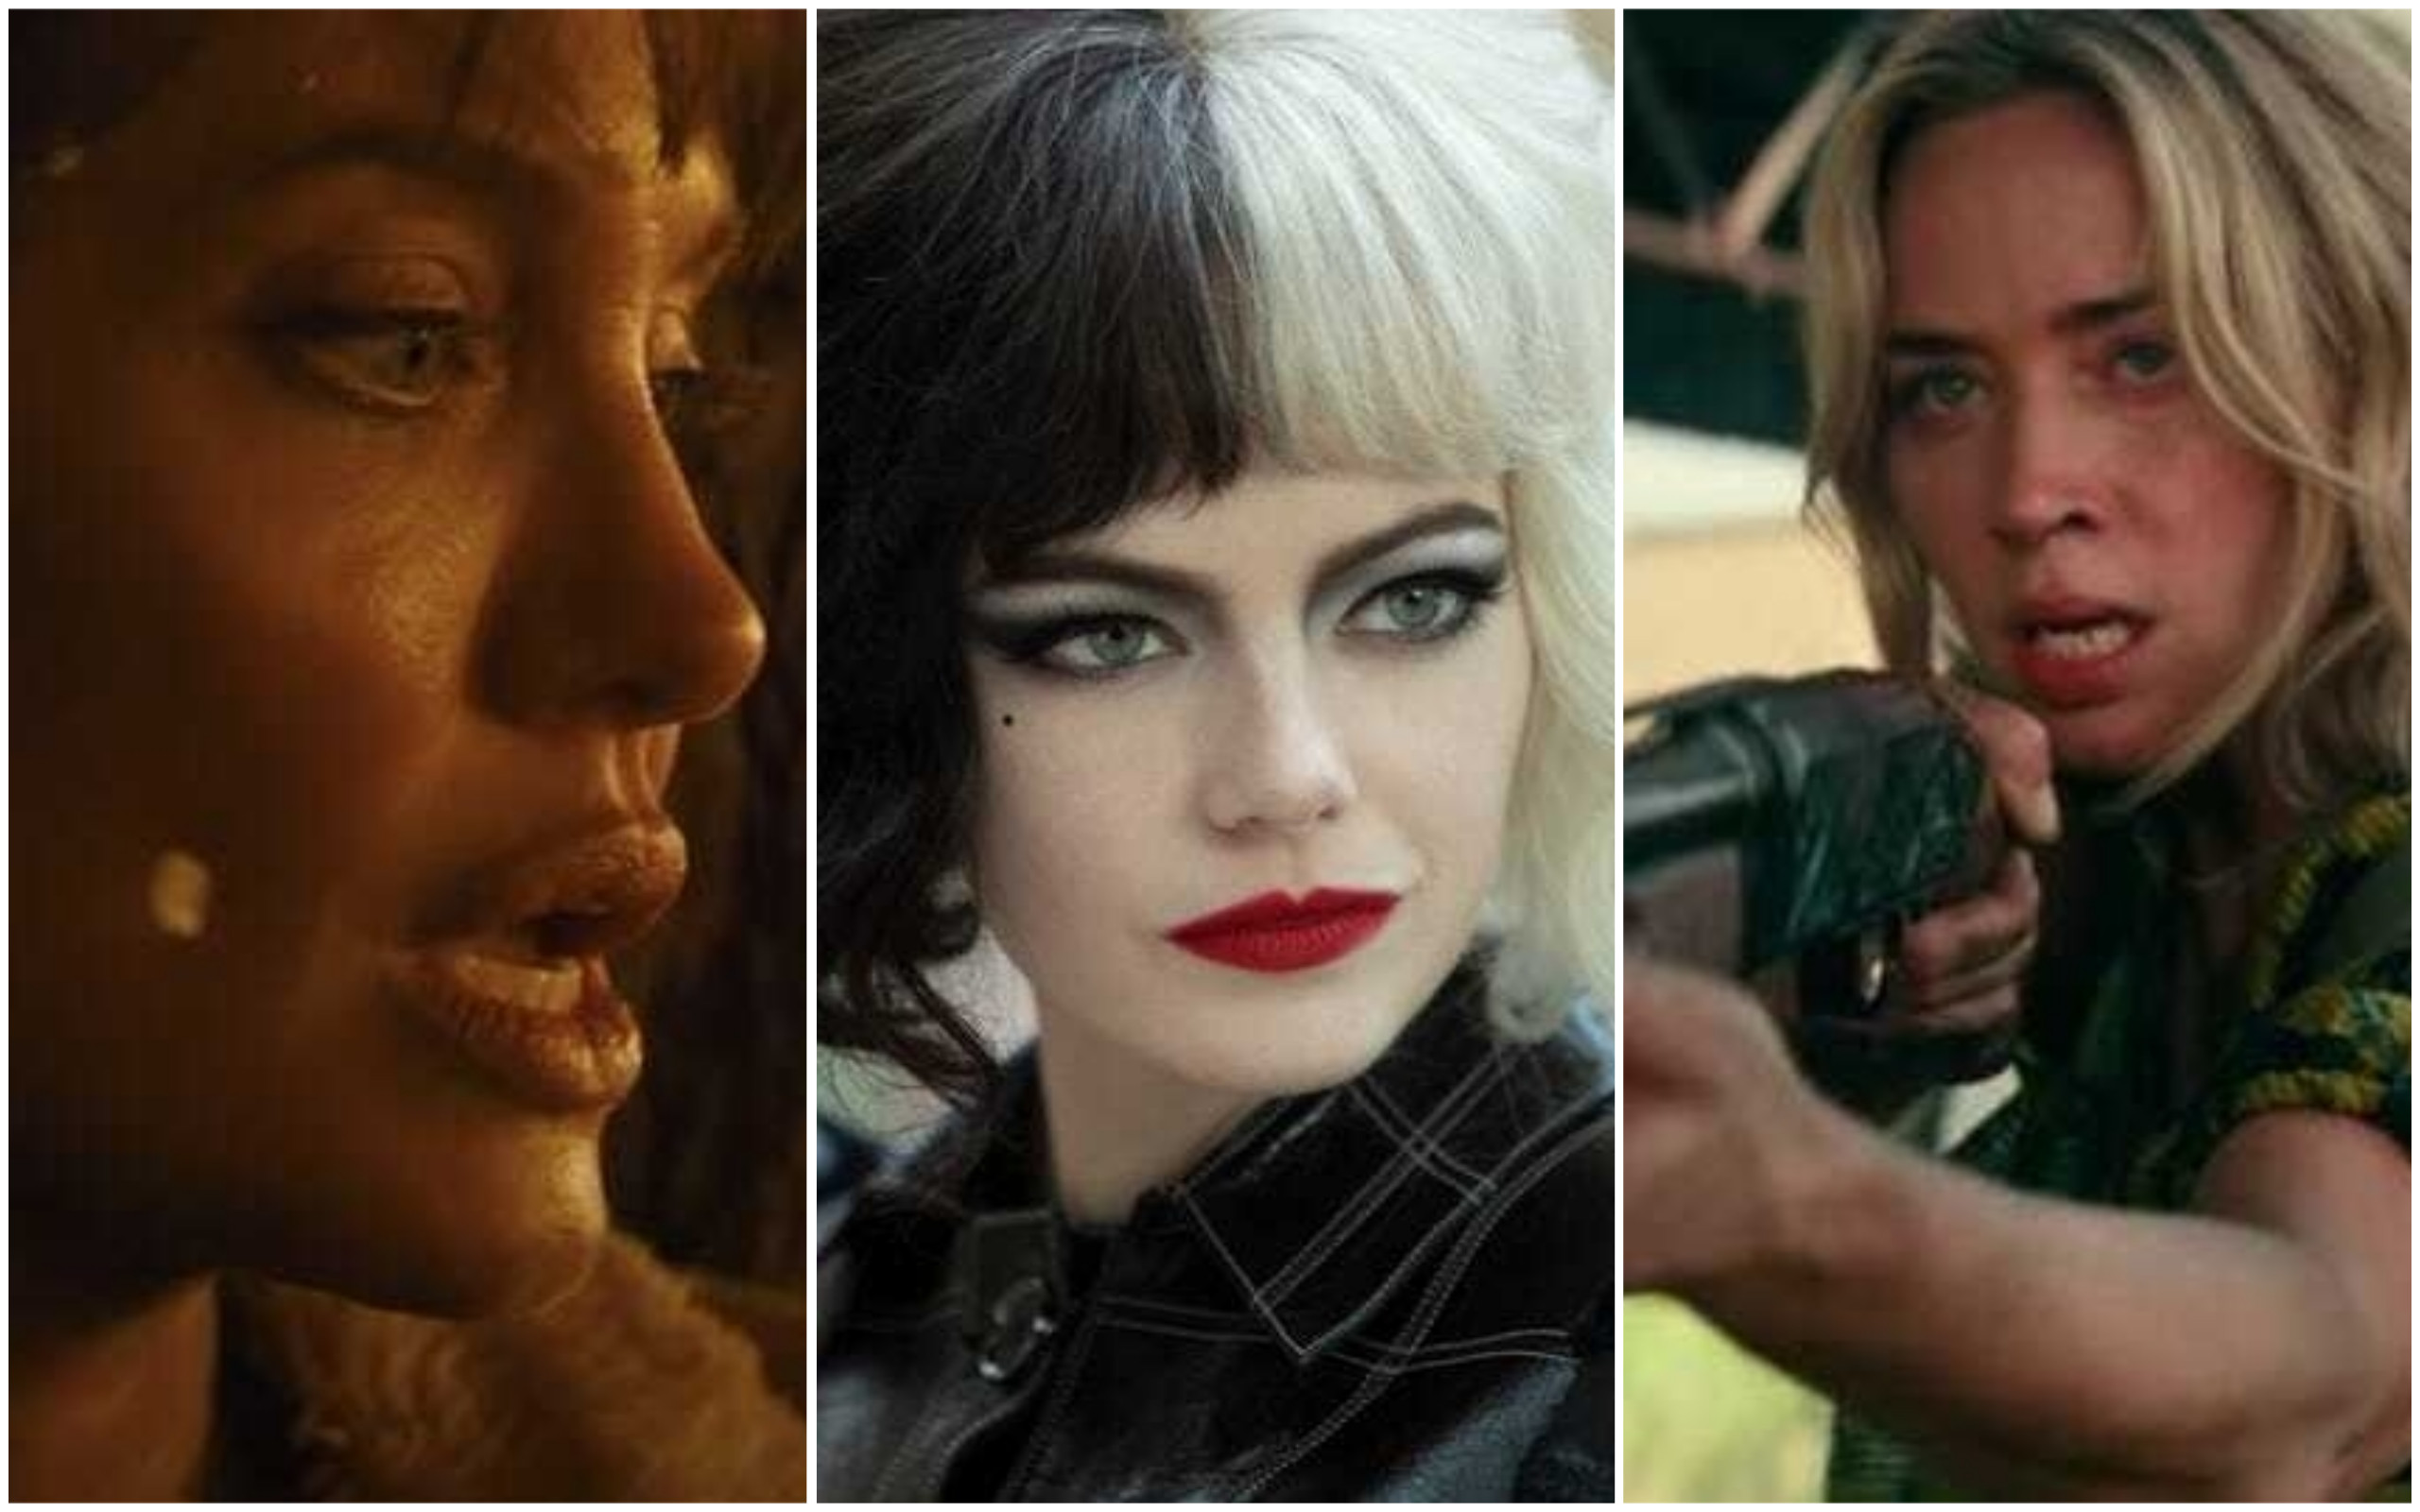 Angelina Jolie in Those Who Wish Me Dead, Emma Stone in Cruella and Emily Blunt in A Quiet Place Part II: 3 of the 7 most anticipated films due out in cinemas or on streaming services in May. Photo: Warner Bros, Disney, Paramount